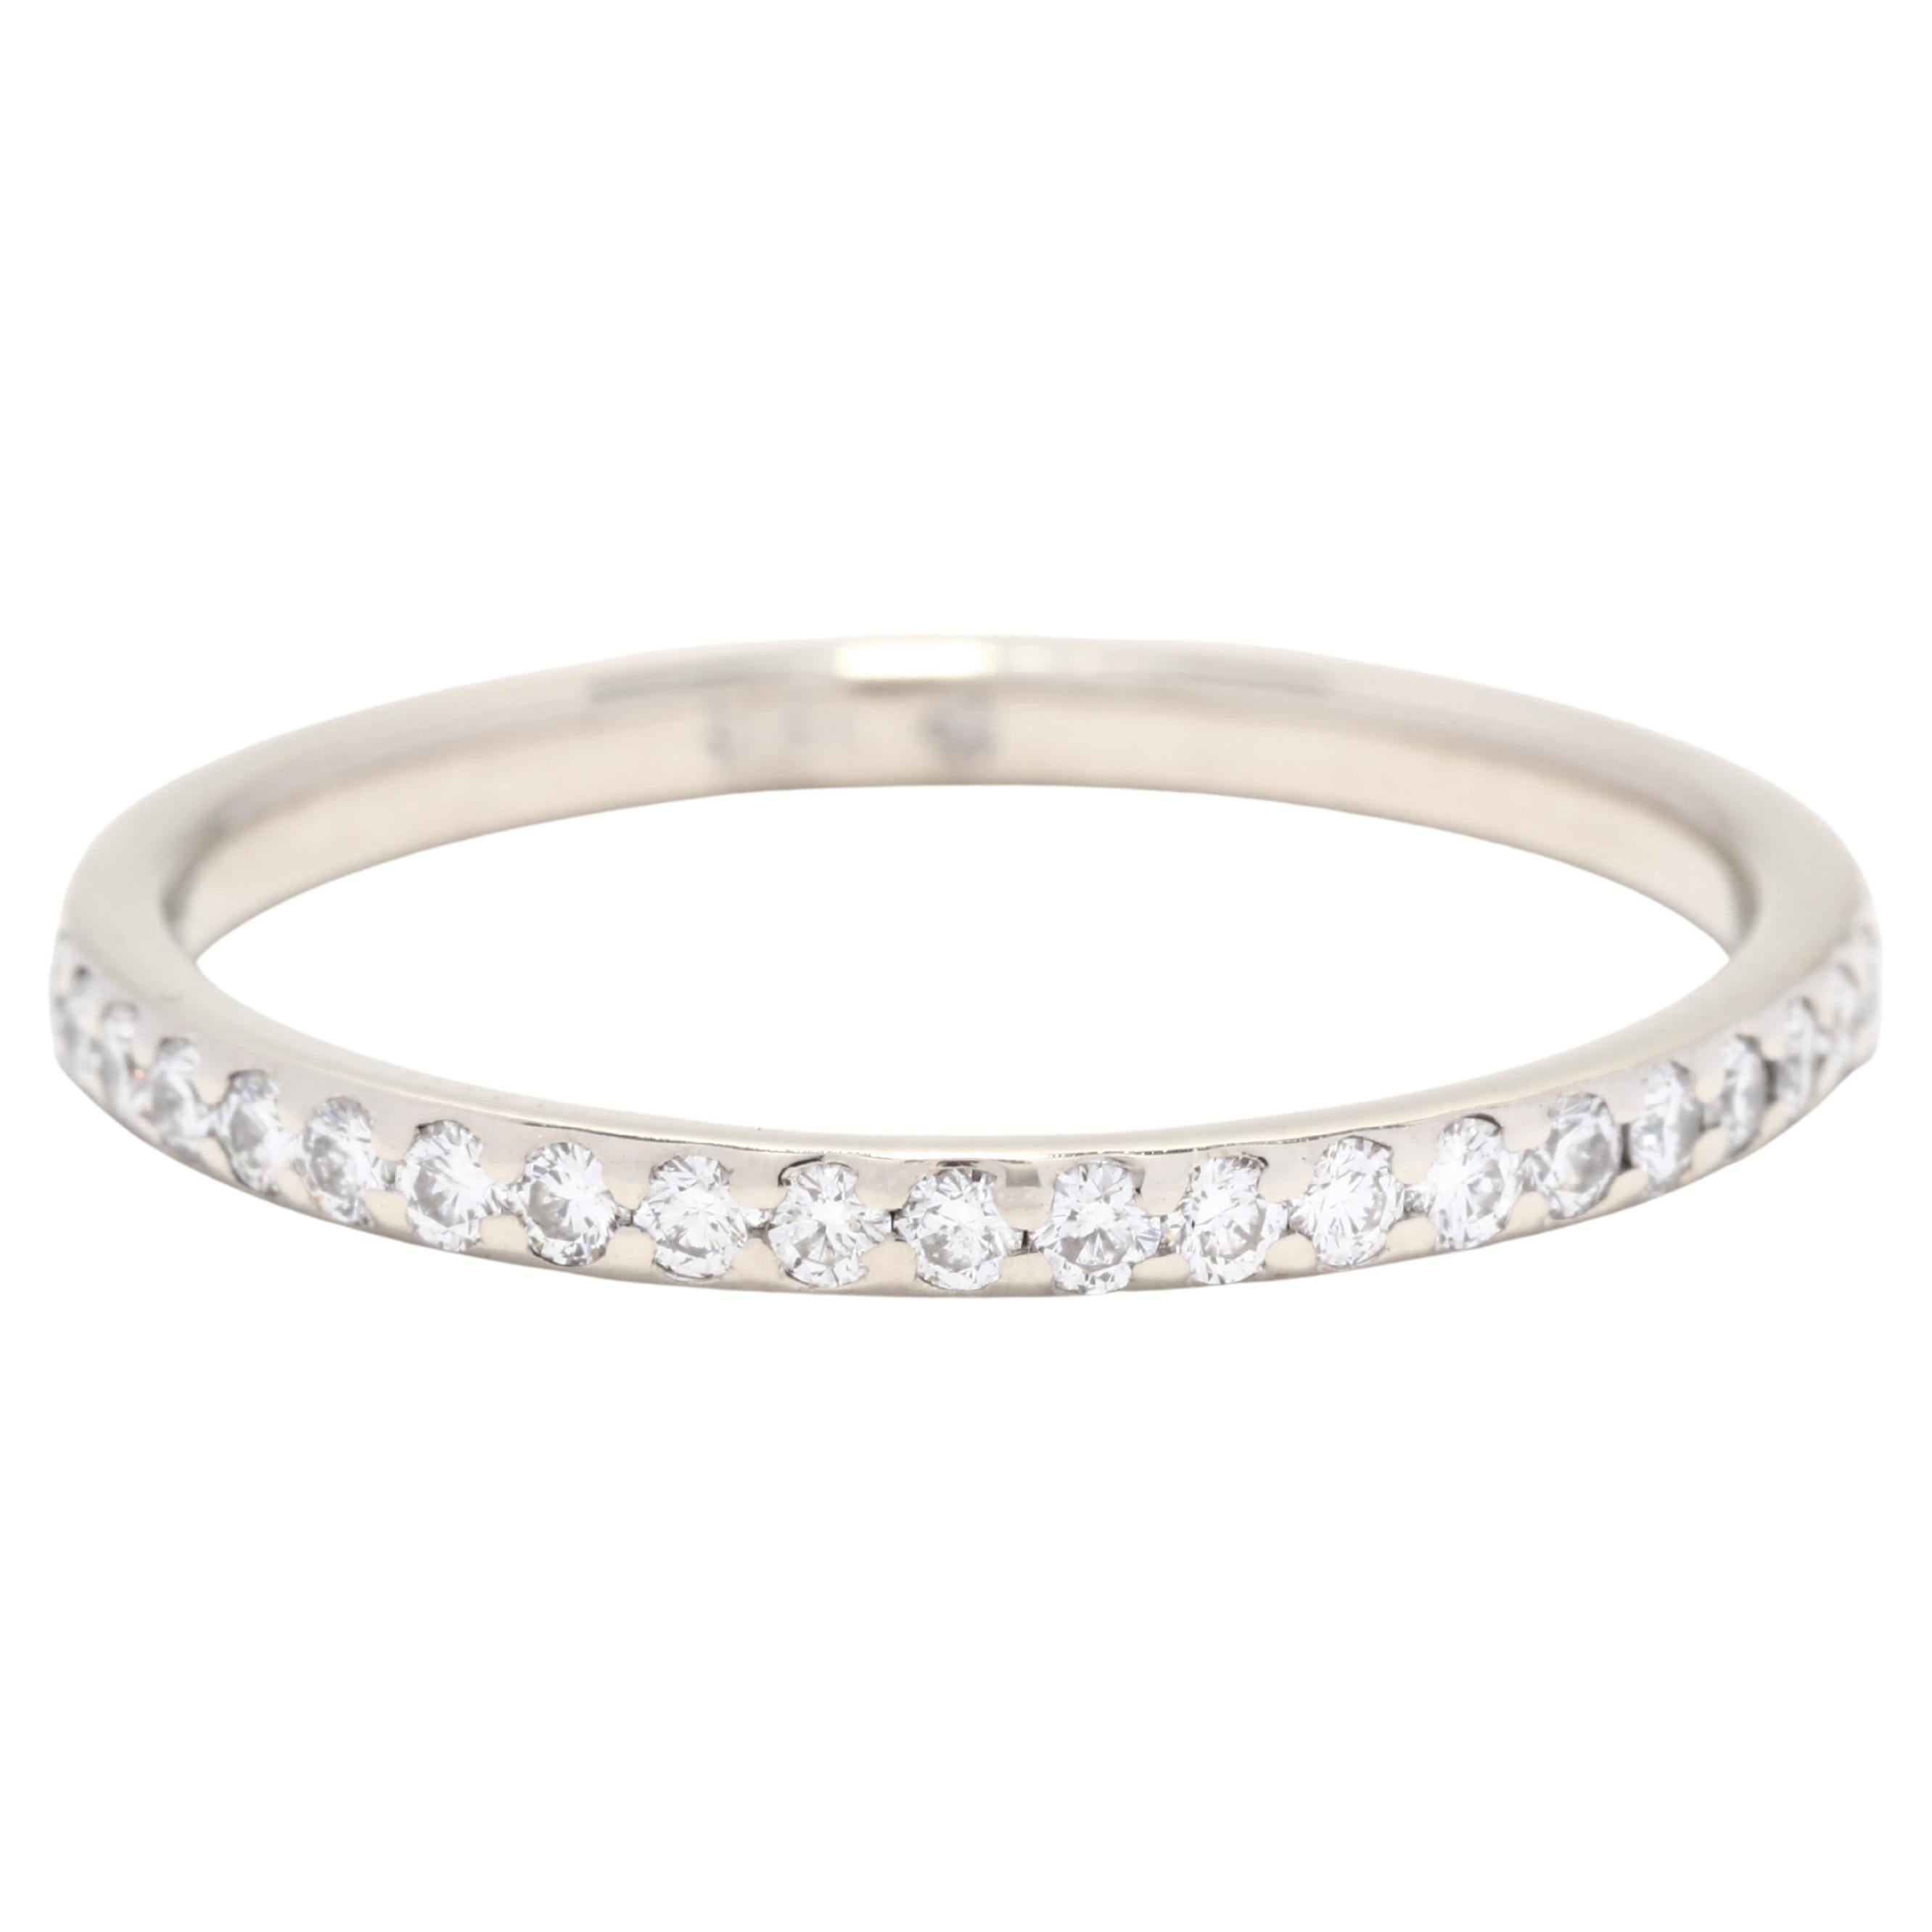 Thin Diamond Eternity Wedding Band, 18K White Gold, Ring, Stackable For Sale